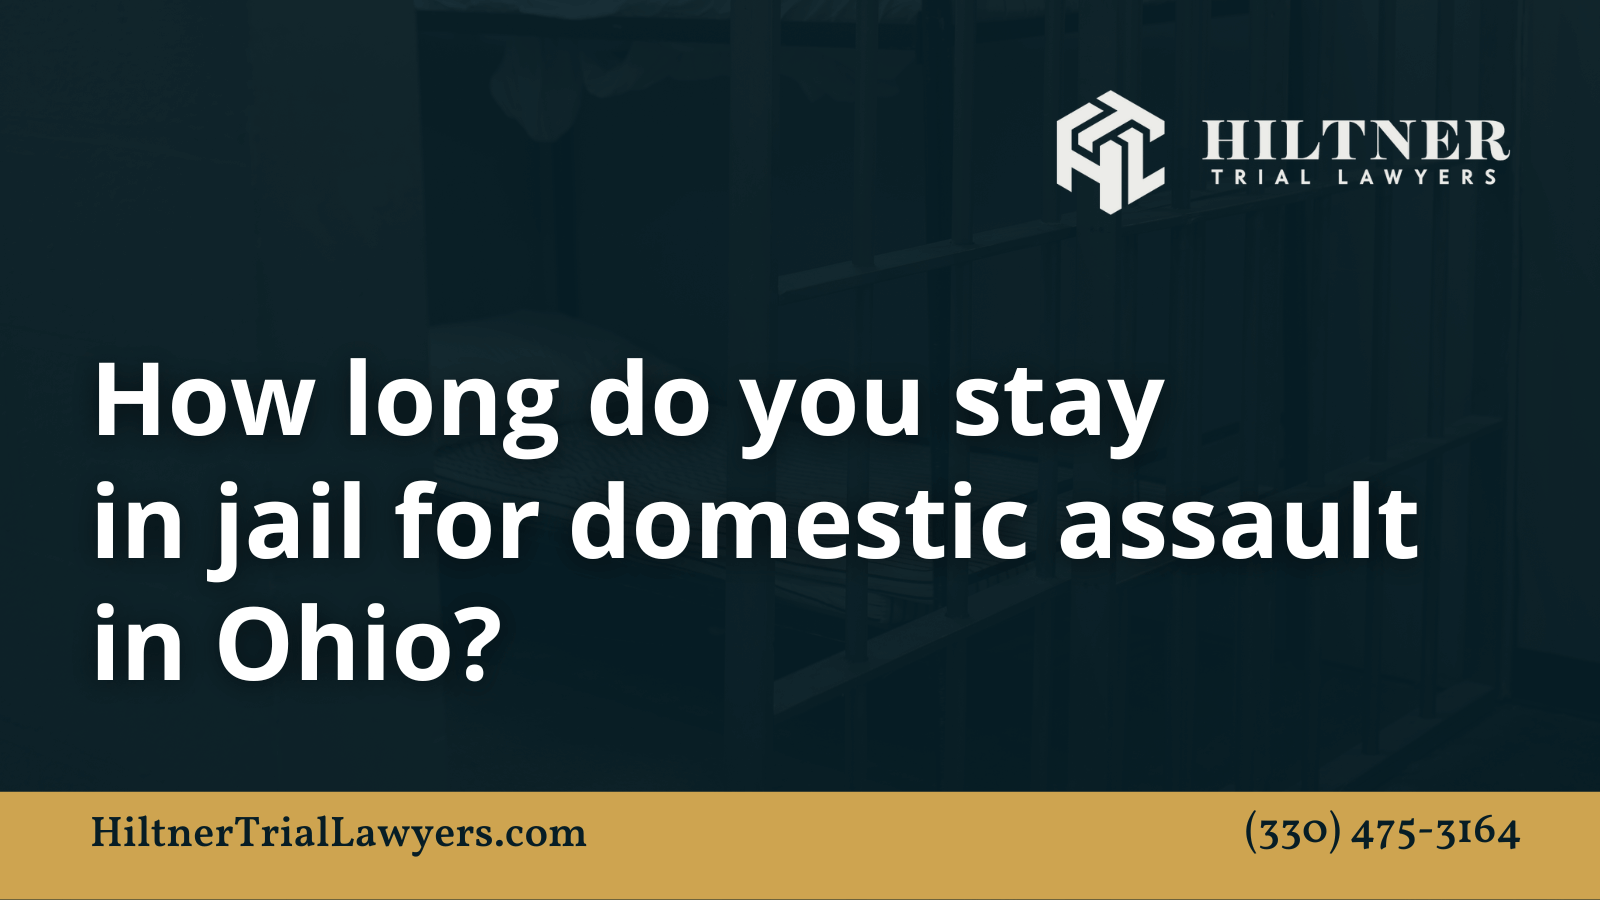 How long do you stay in jail for domestic assault in Ohio - Hiltner Trial Lawyers Ohio - max hiltner